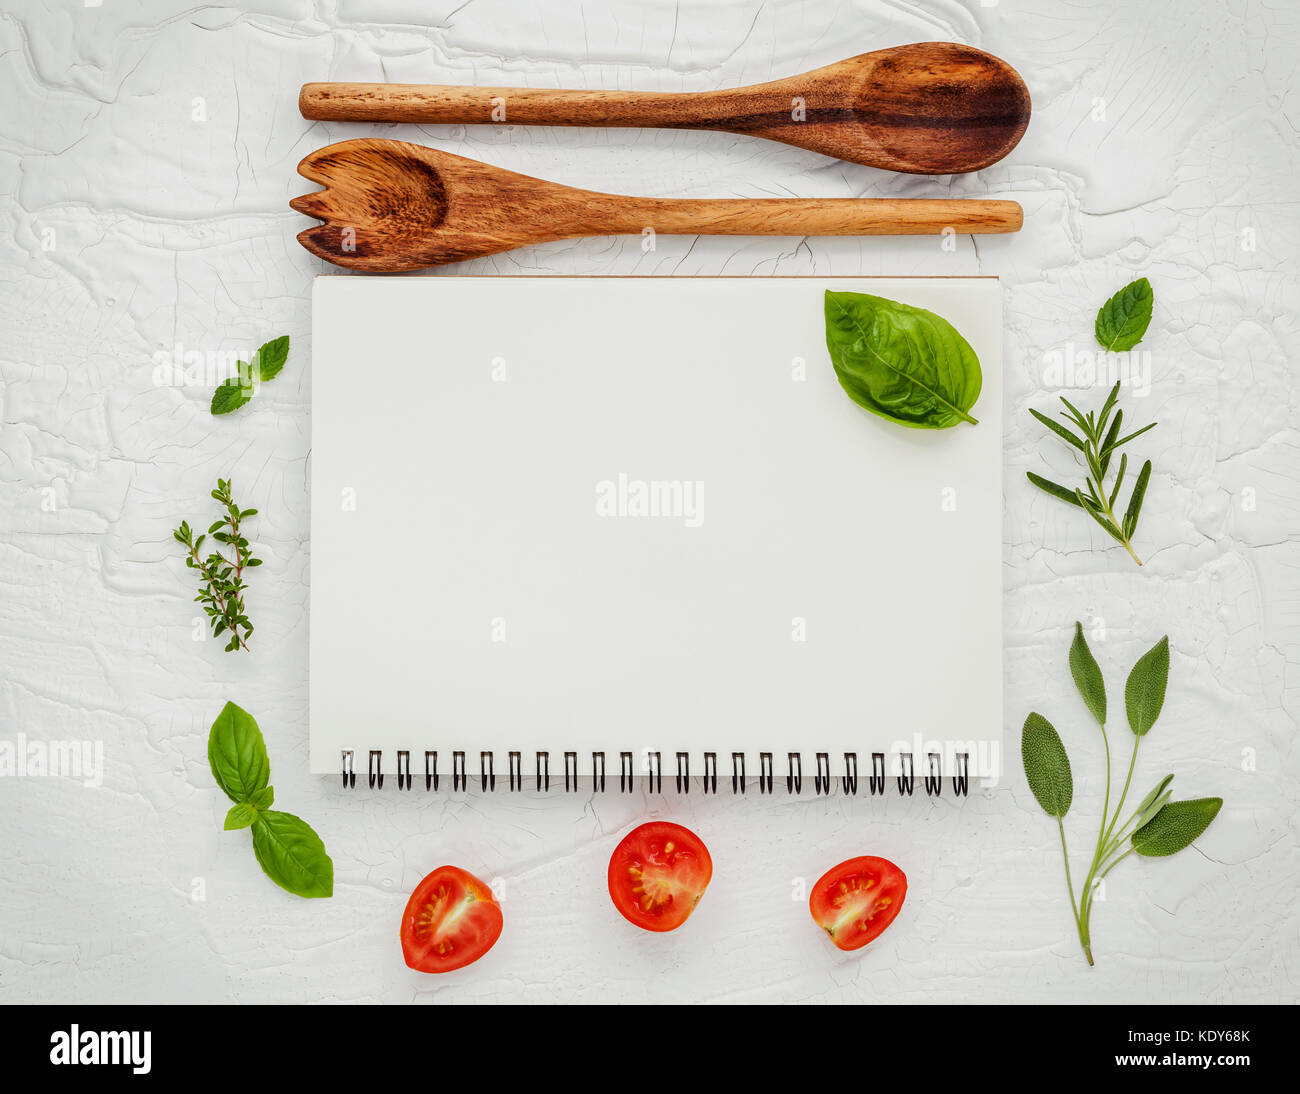 Foods Background Food Menu Design High Resolution Stock Photography And Images Alamy